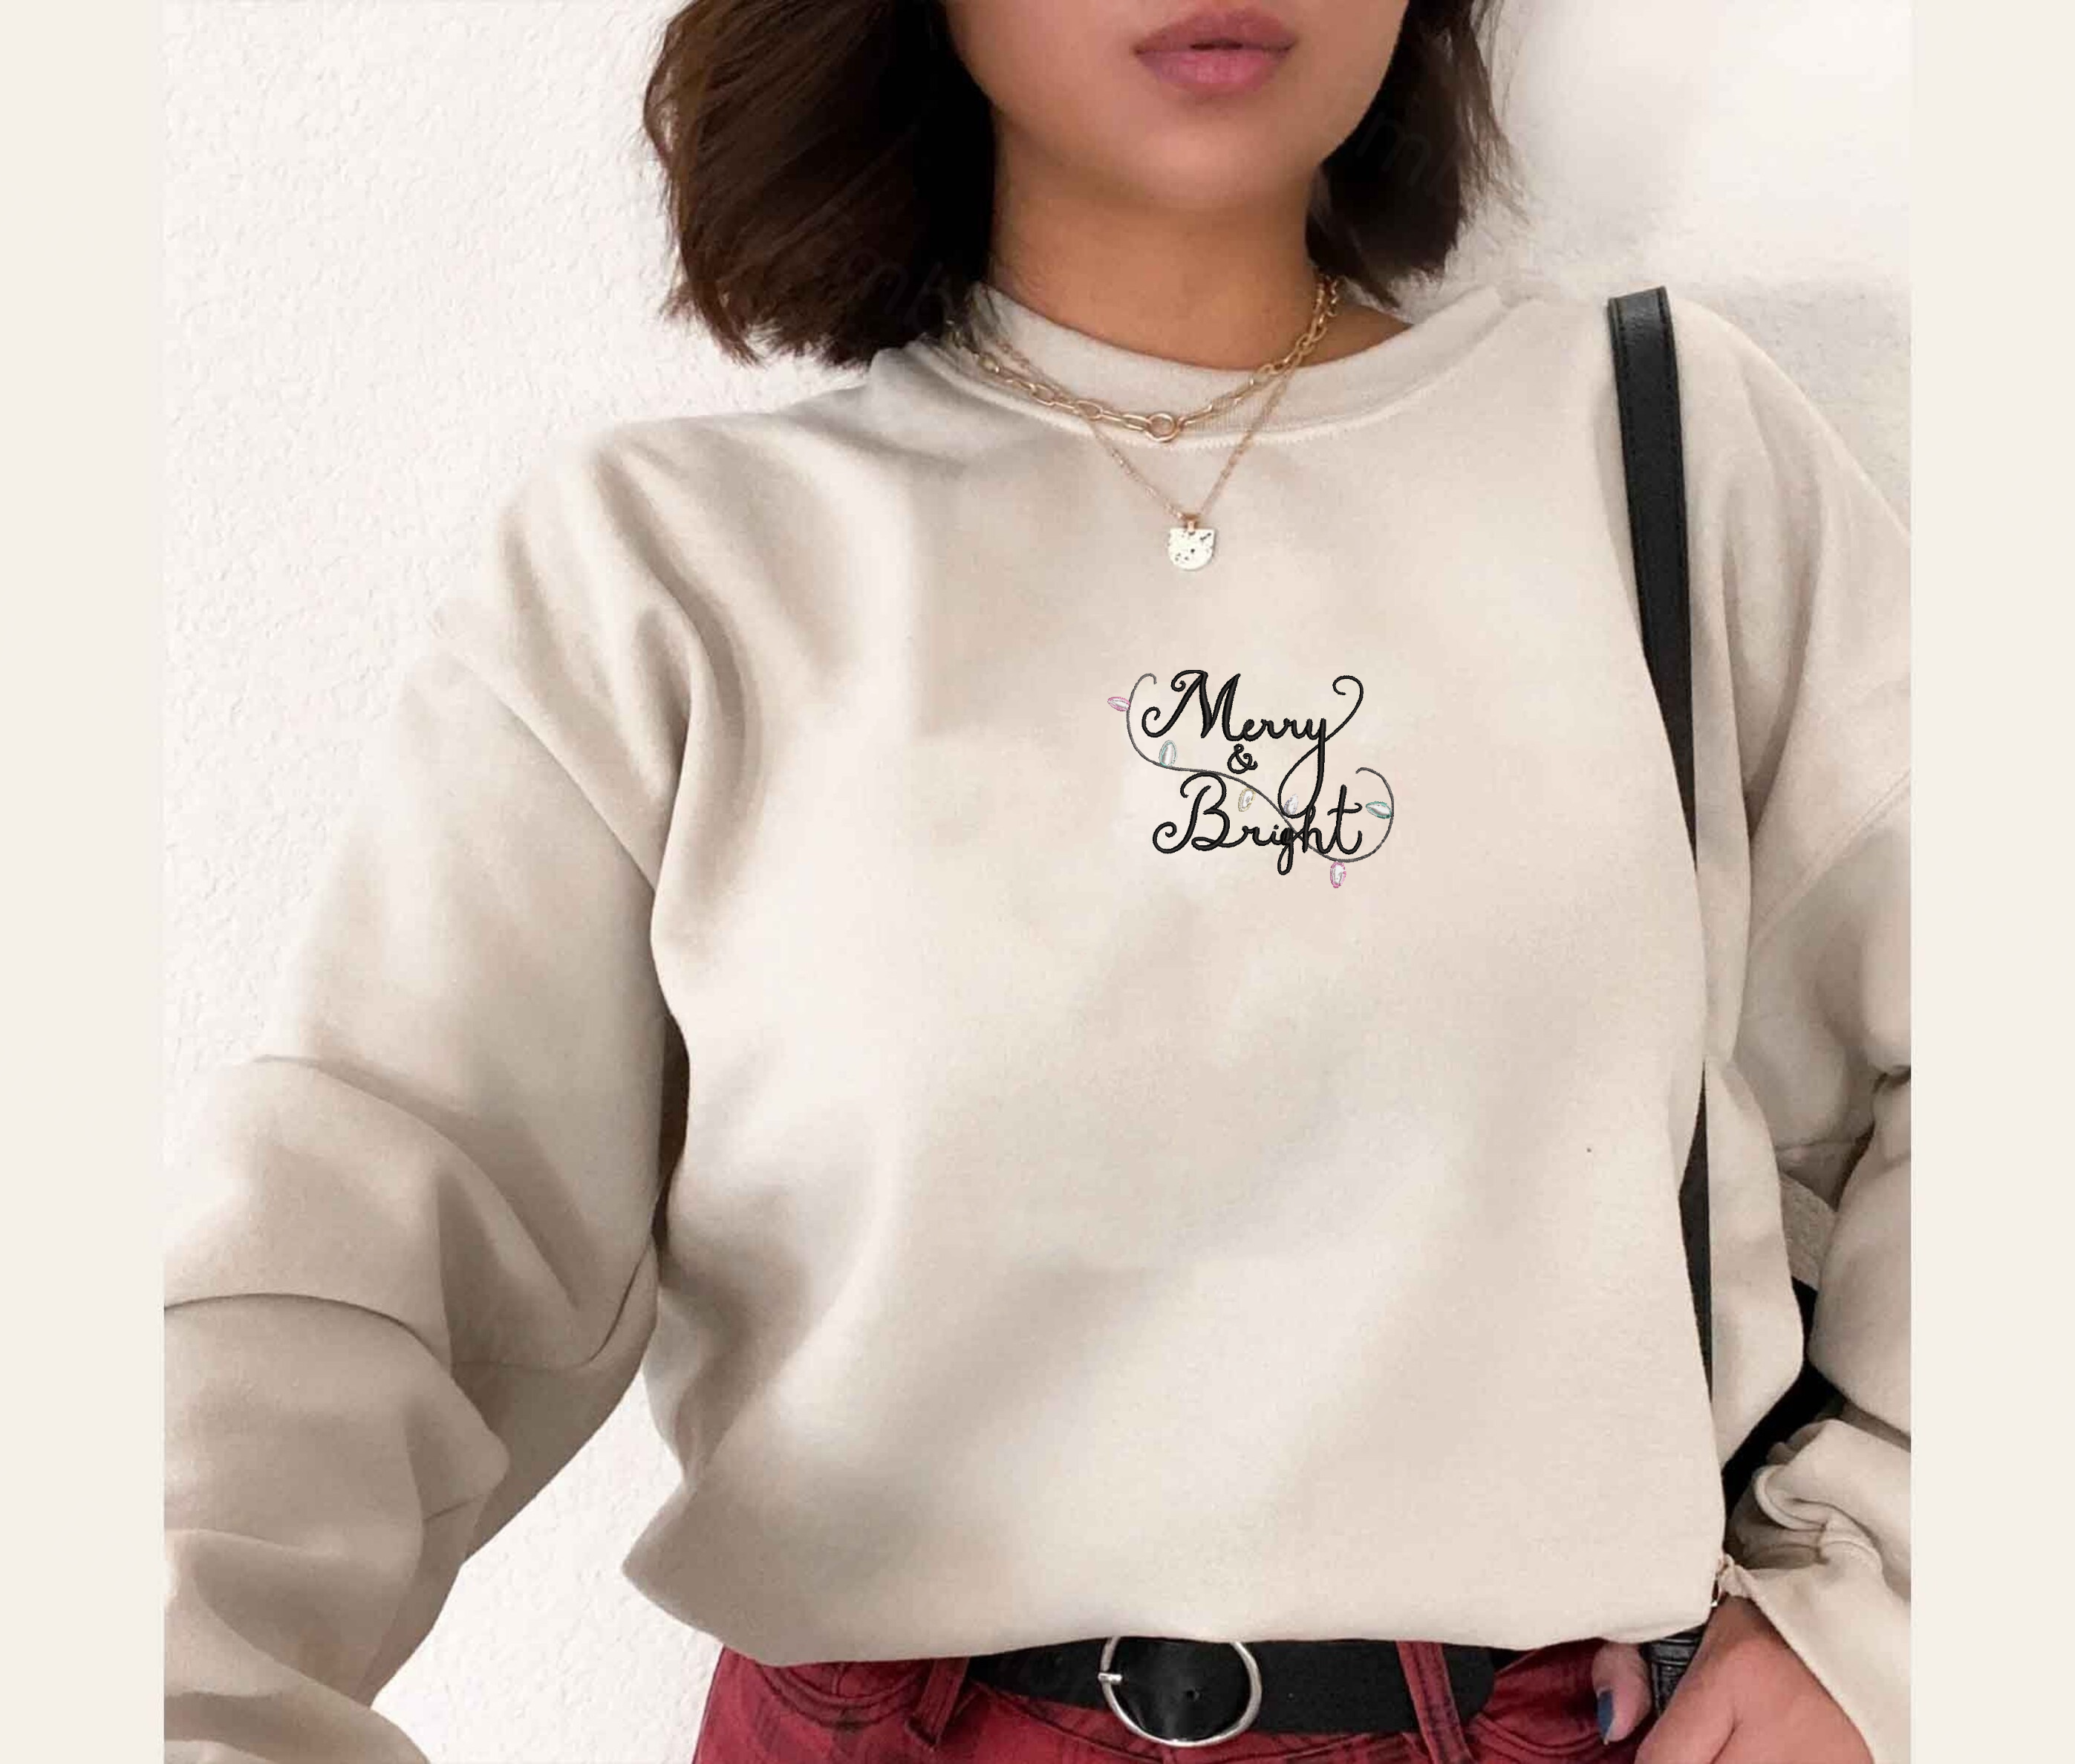 Merry & Bright - Hoodie Embroly Embroidered Sweatshirt, Christmas